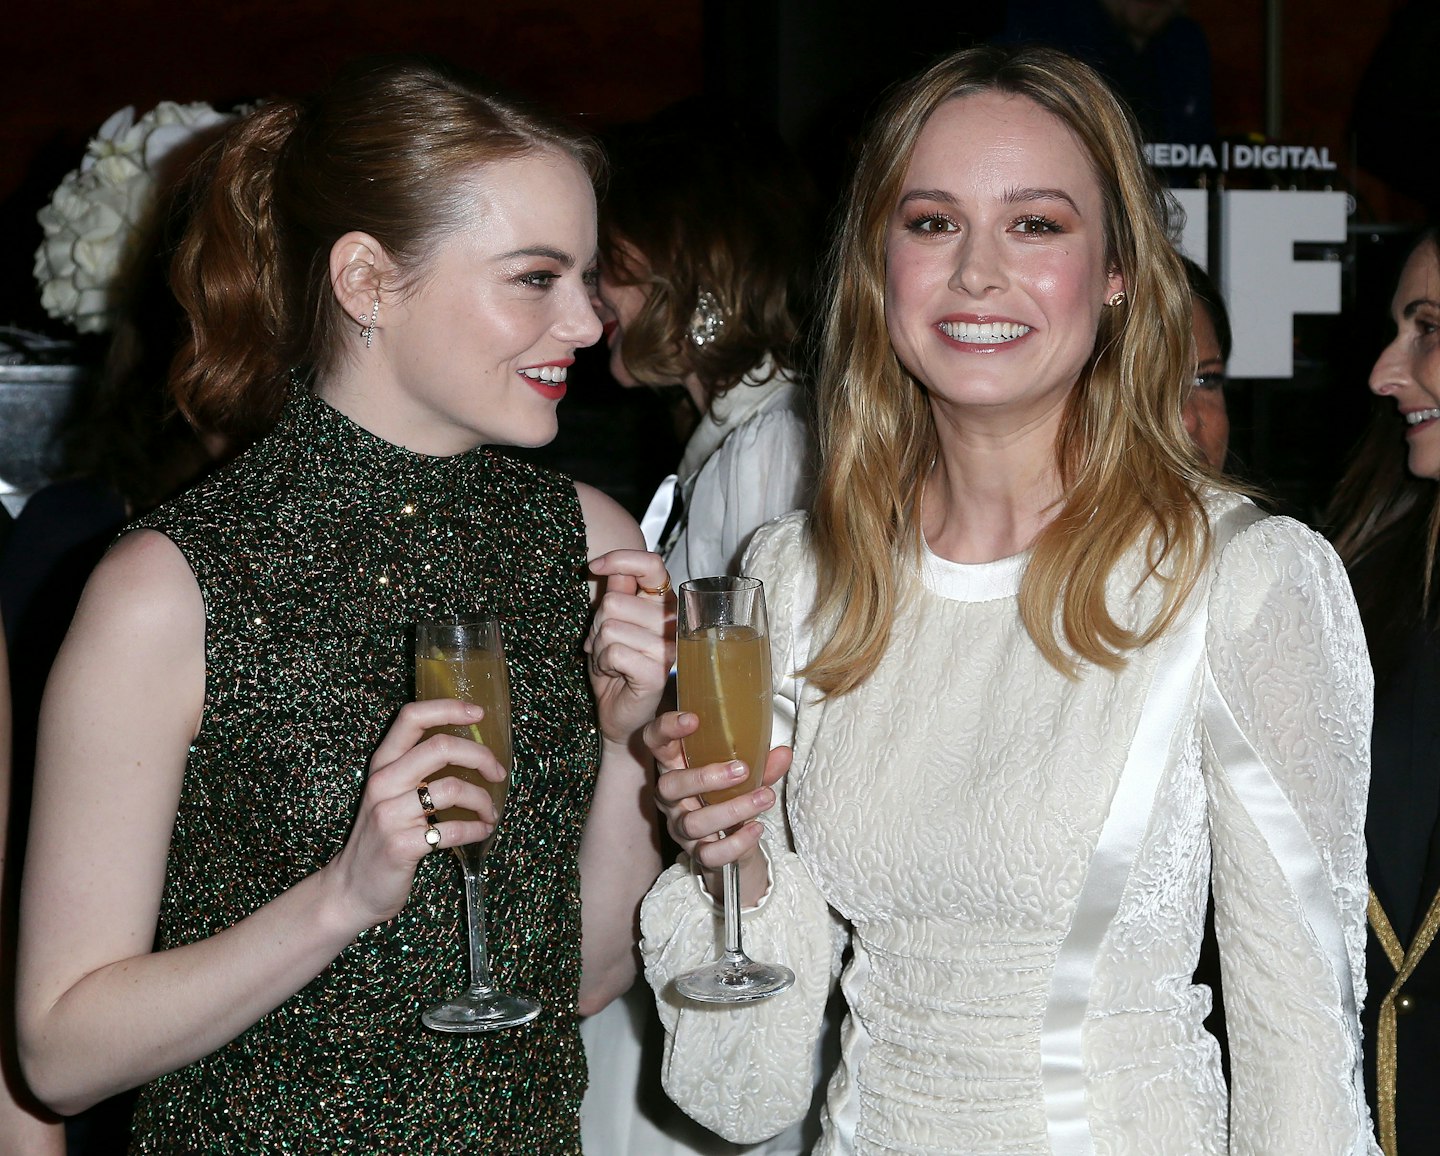 Emma Stone and Brie Larson at a pre-Oscars party